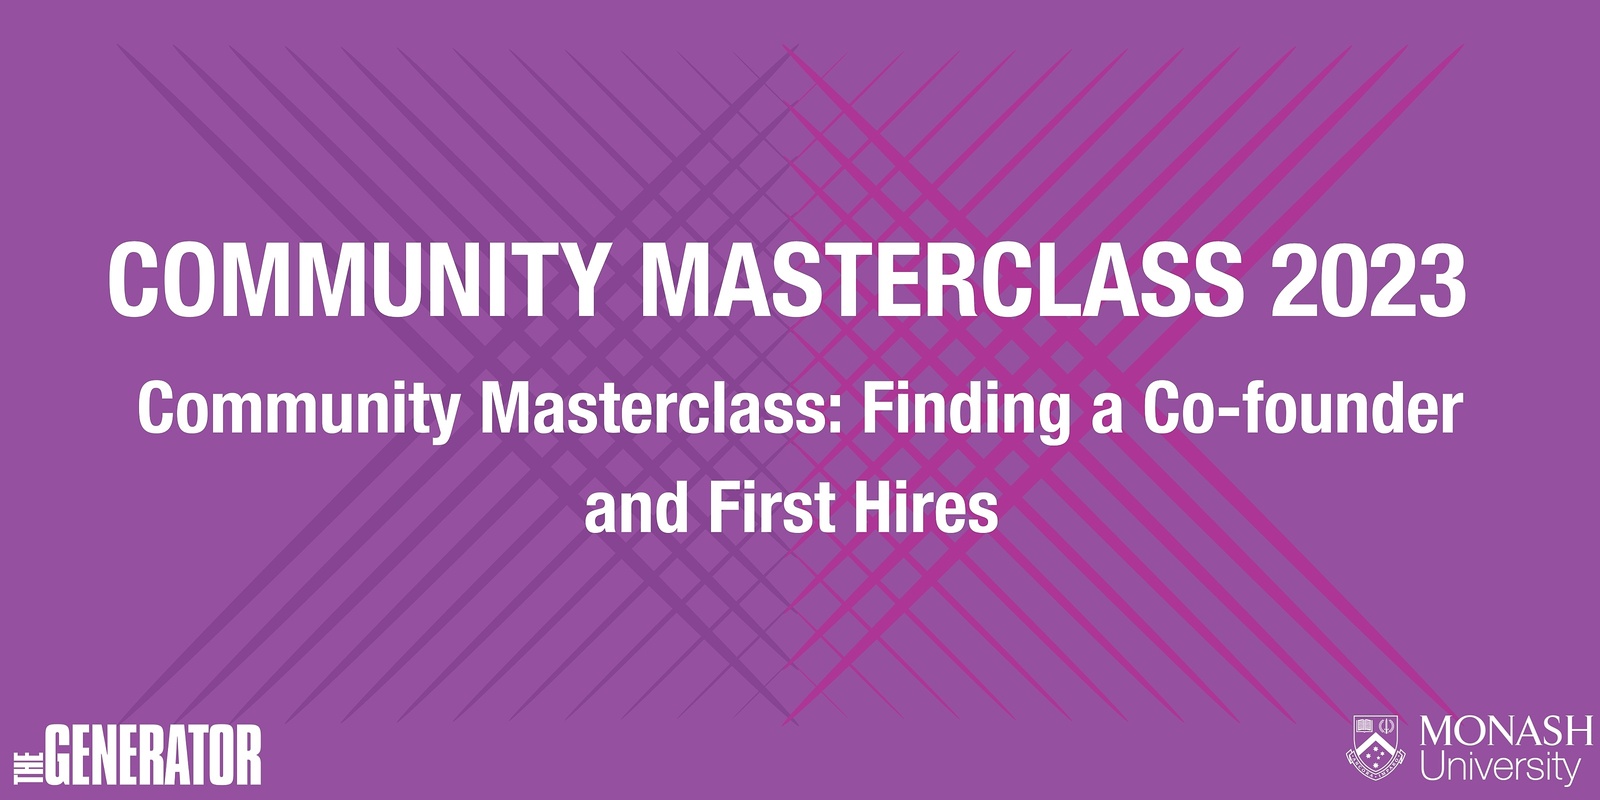 Banner image for Community Masterclass: Finding a Co-founder and First Hires 